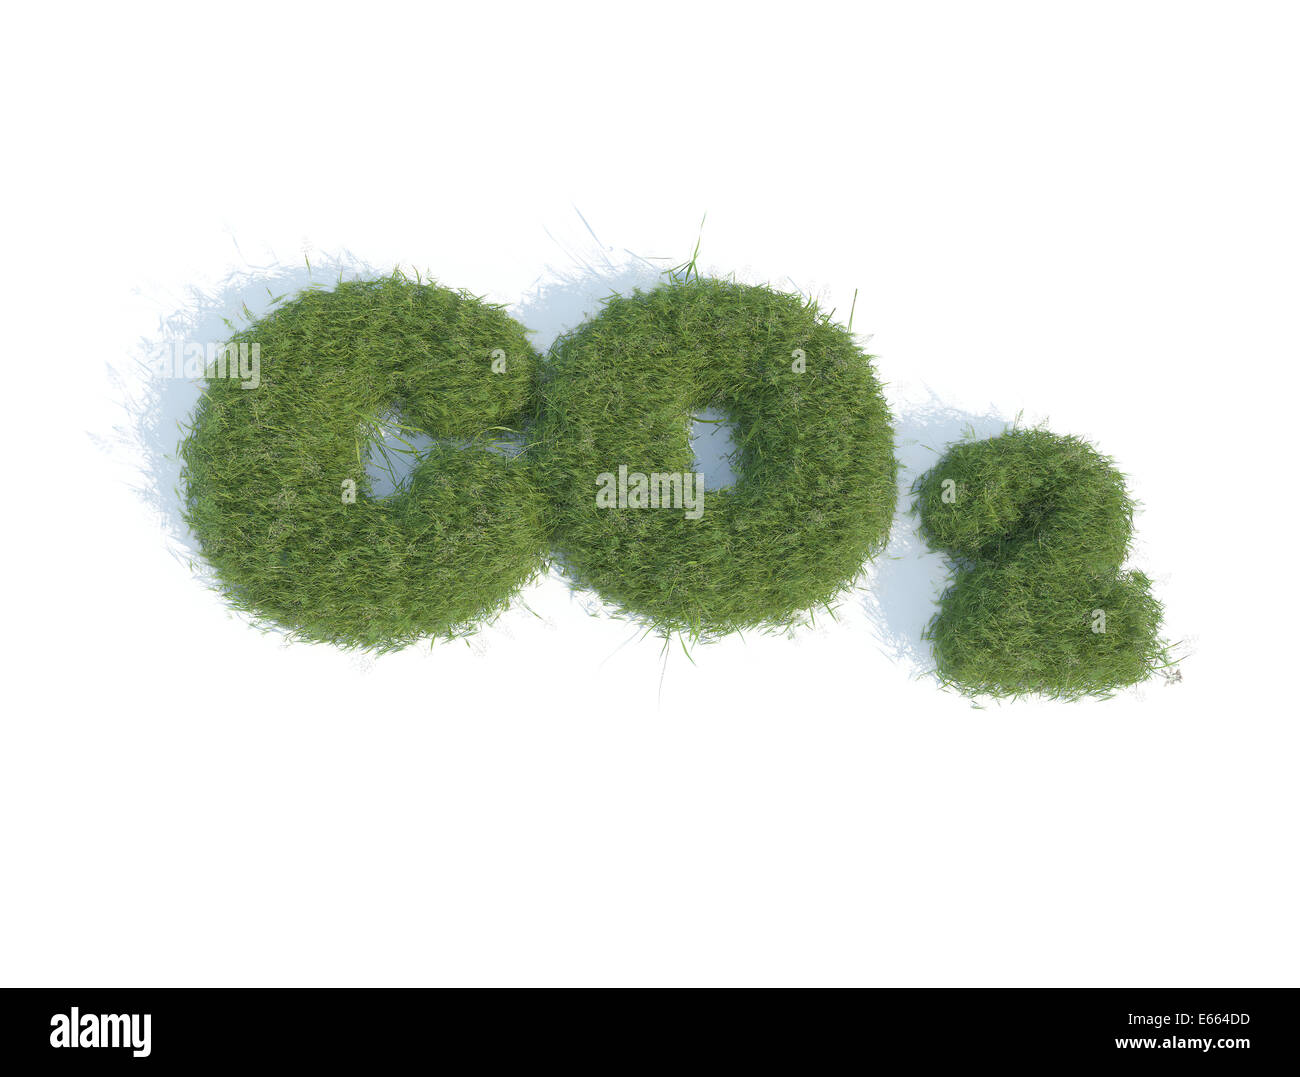 co2 green grass in the form of letters Stock Photo